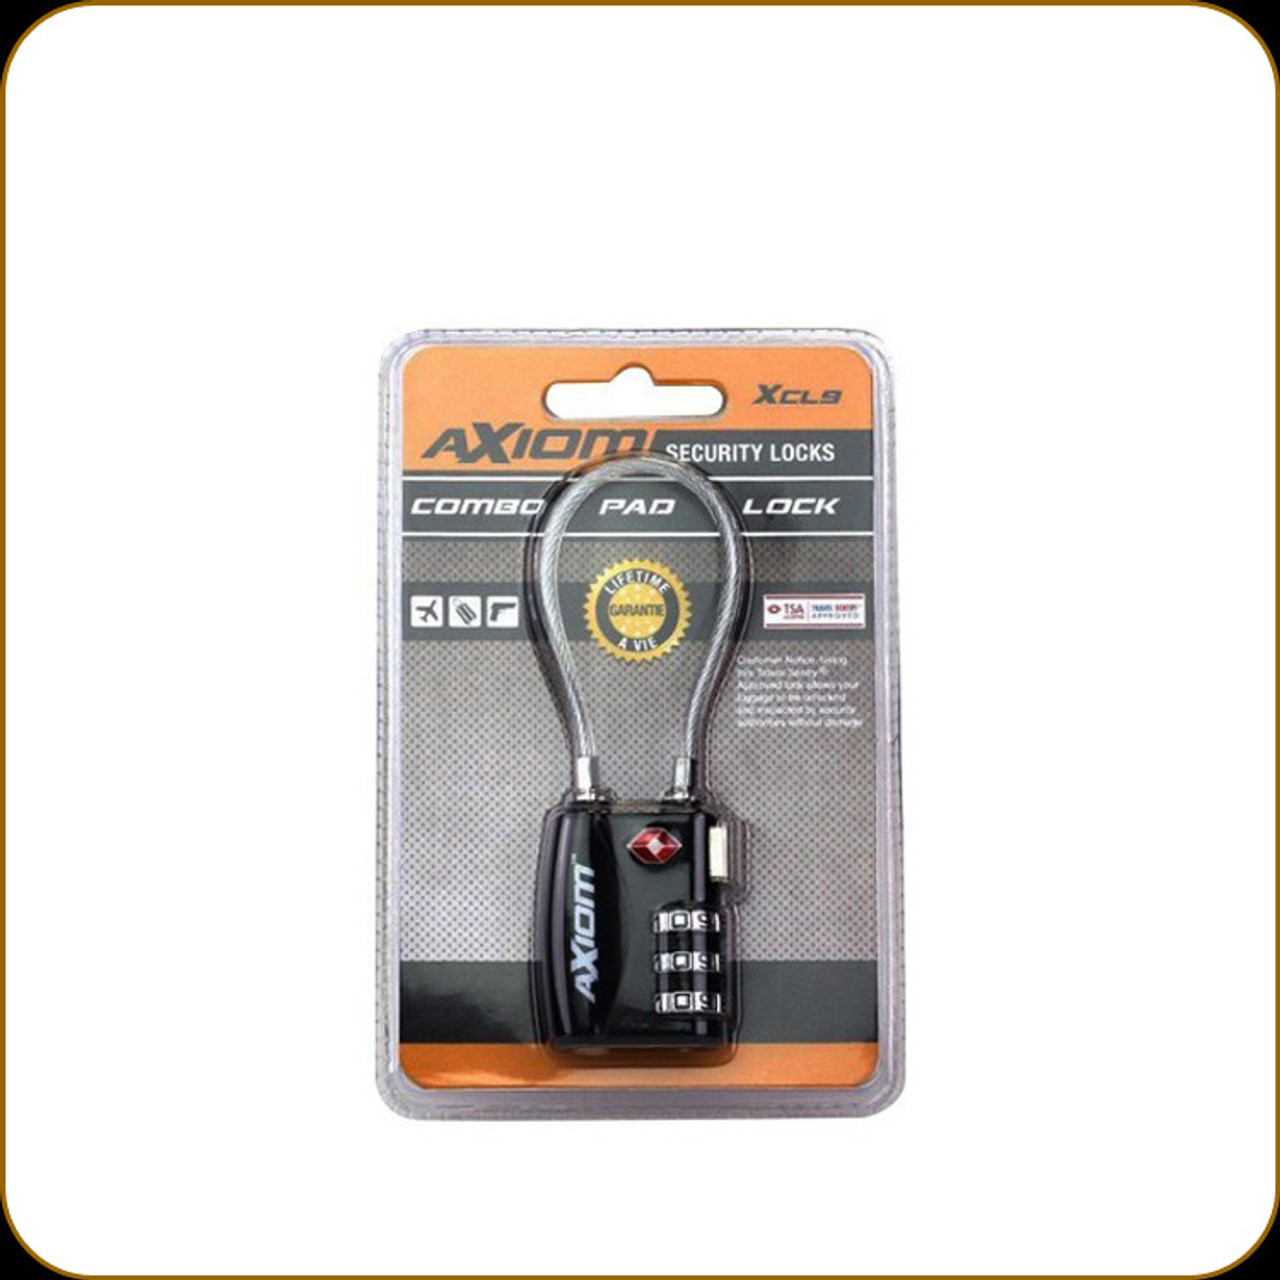 Product Description
The Axiom Combination pad lock is easy to set and reset the combination. It features a flexible cable shackle for added security. It’s coated shackle is there to protect gun cases and luggage. This is a perfect way to lock your firearms up for range trips.

